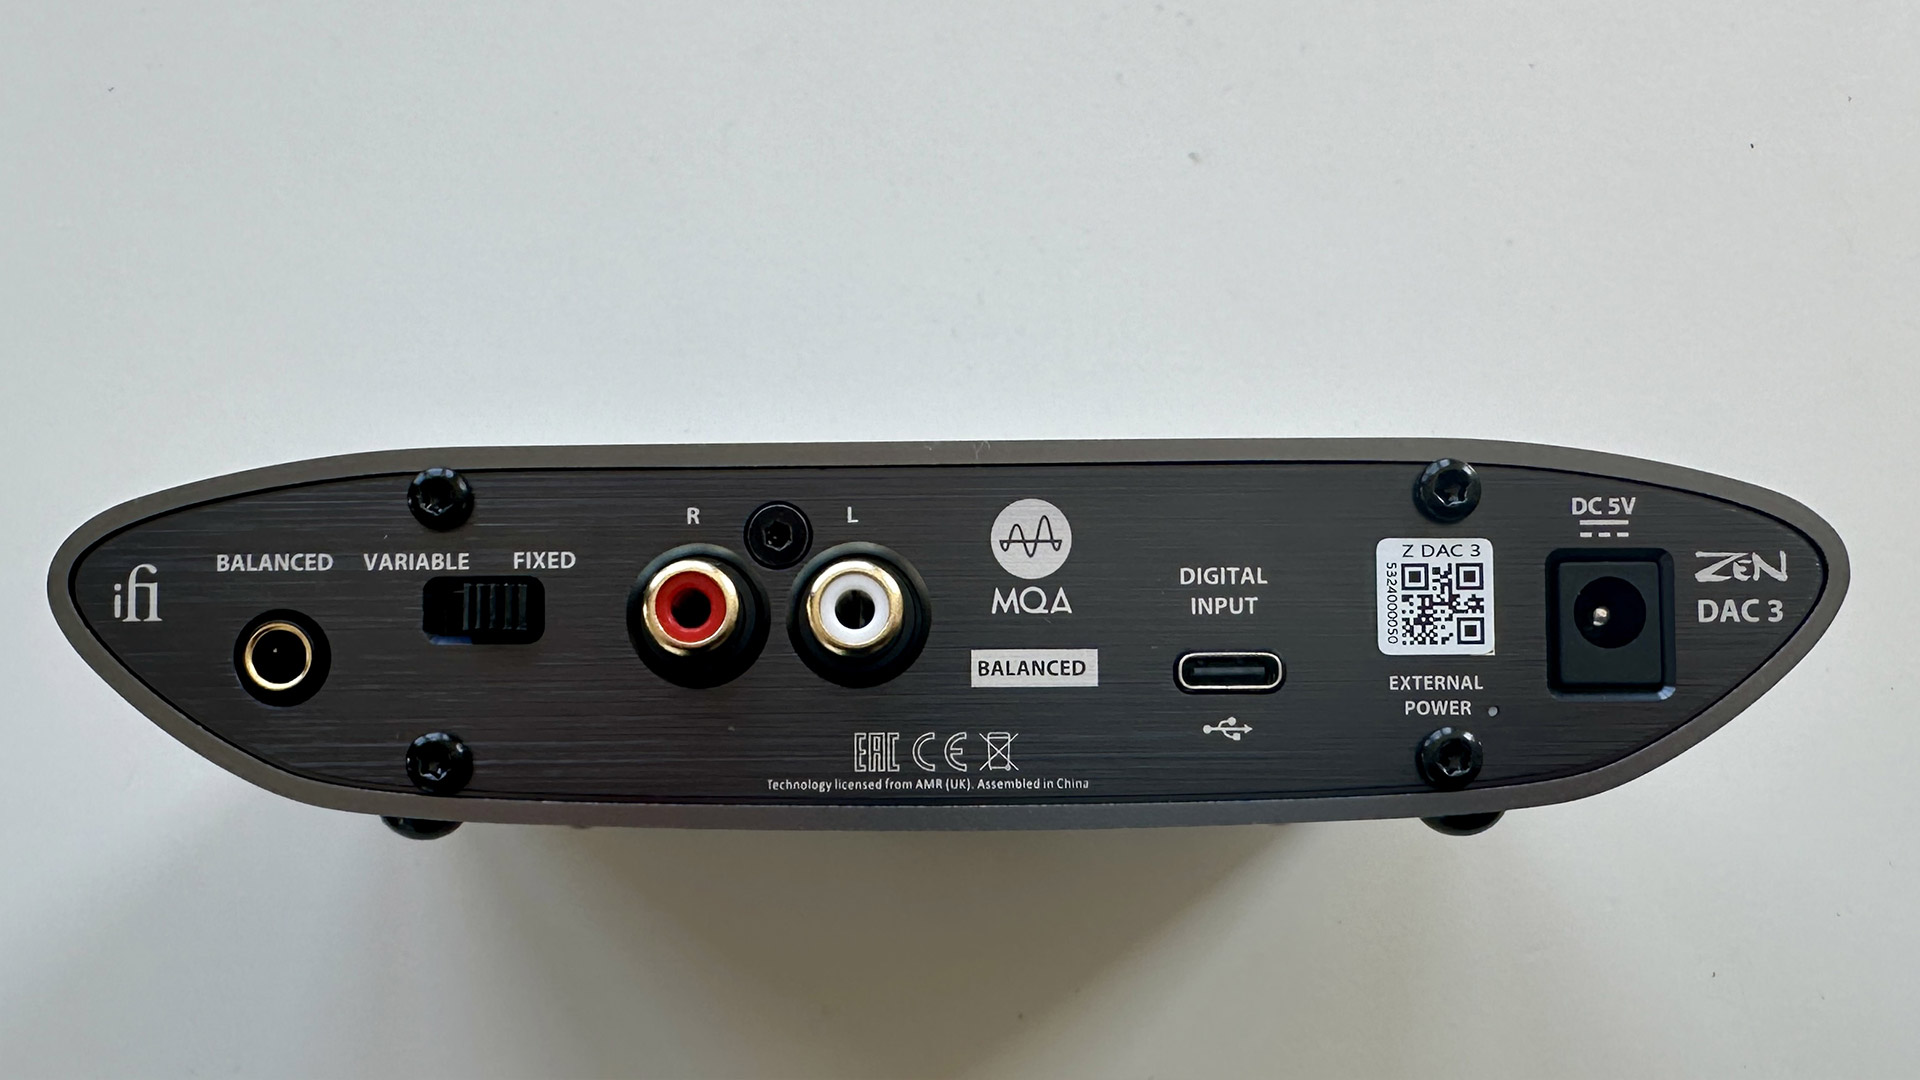 A close up of the bottom of the iFi Zen DAC 3